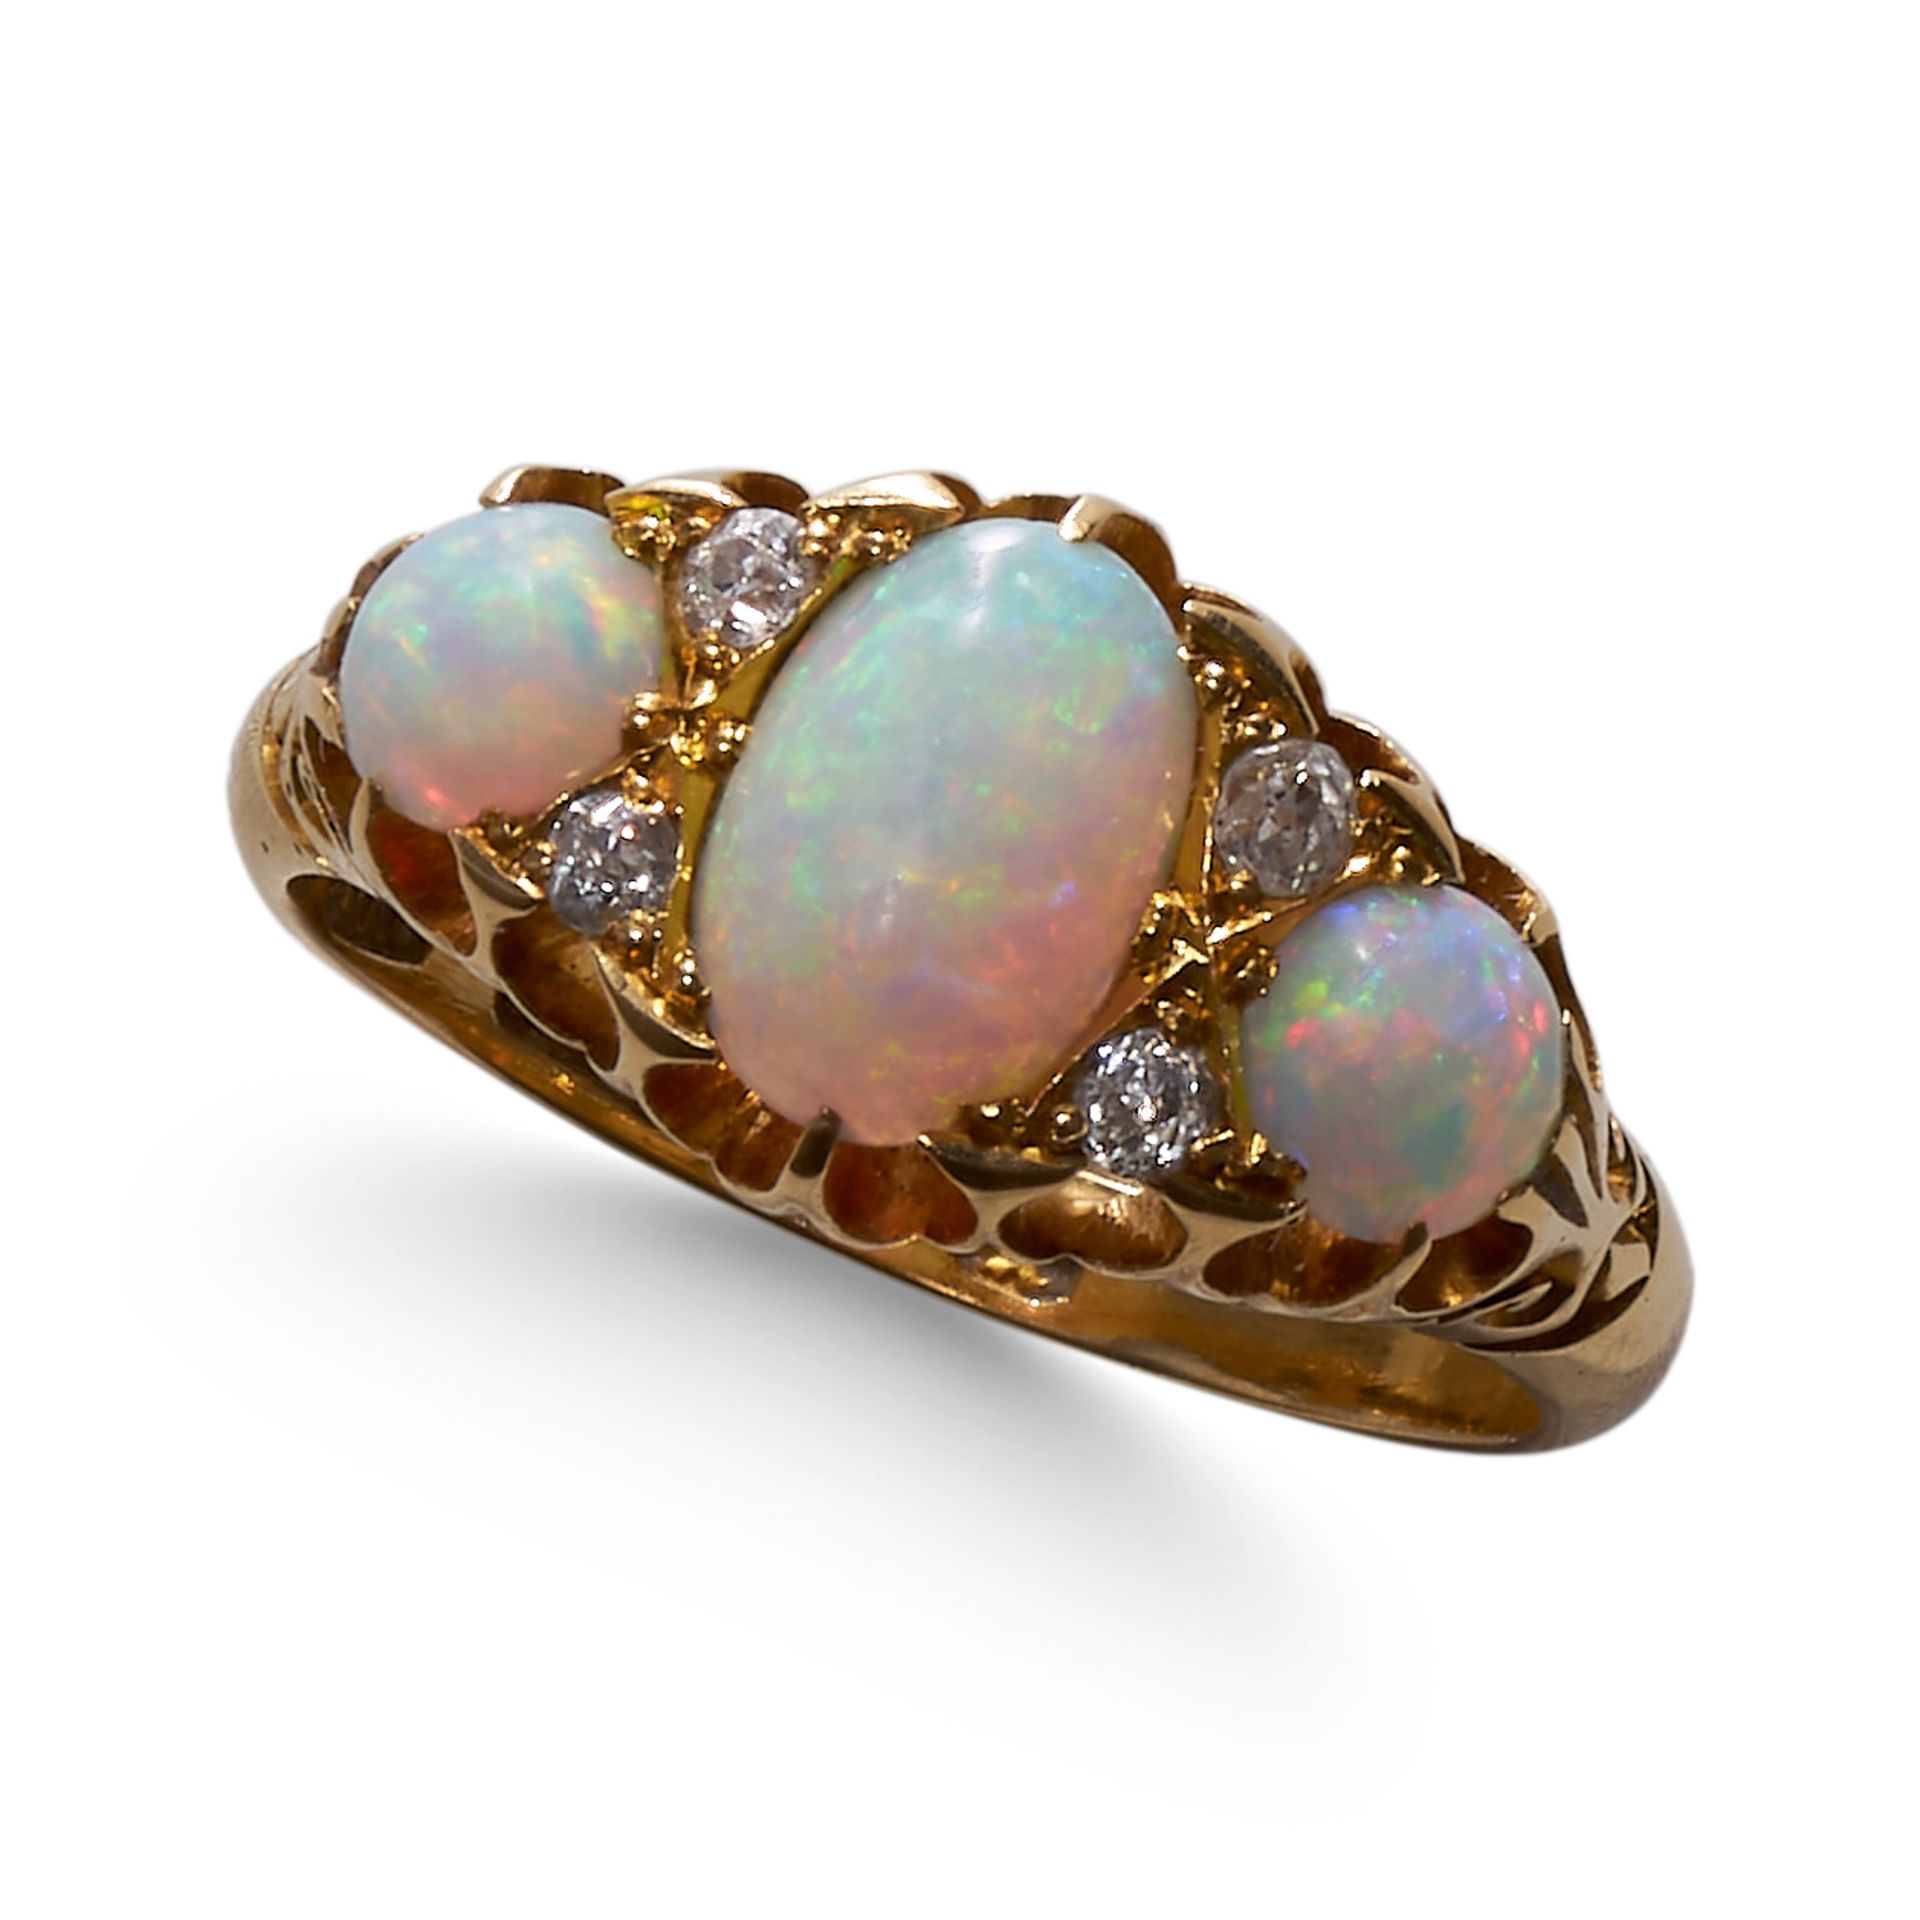 NO RESERVE, A VICTORIAN 18CT SEVEN STONE OPAL AND DIAMOND RING.